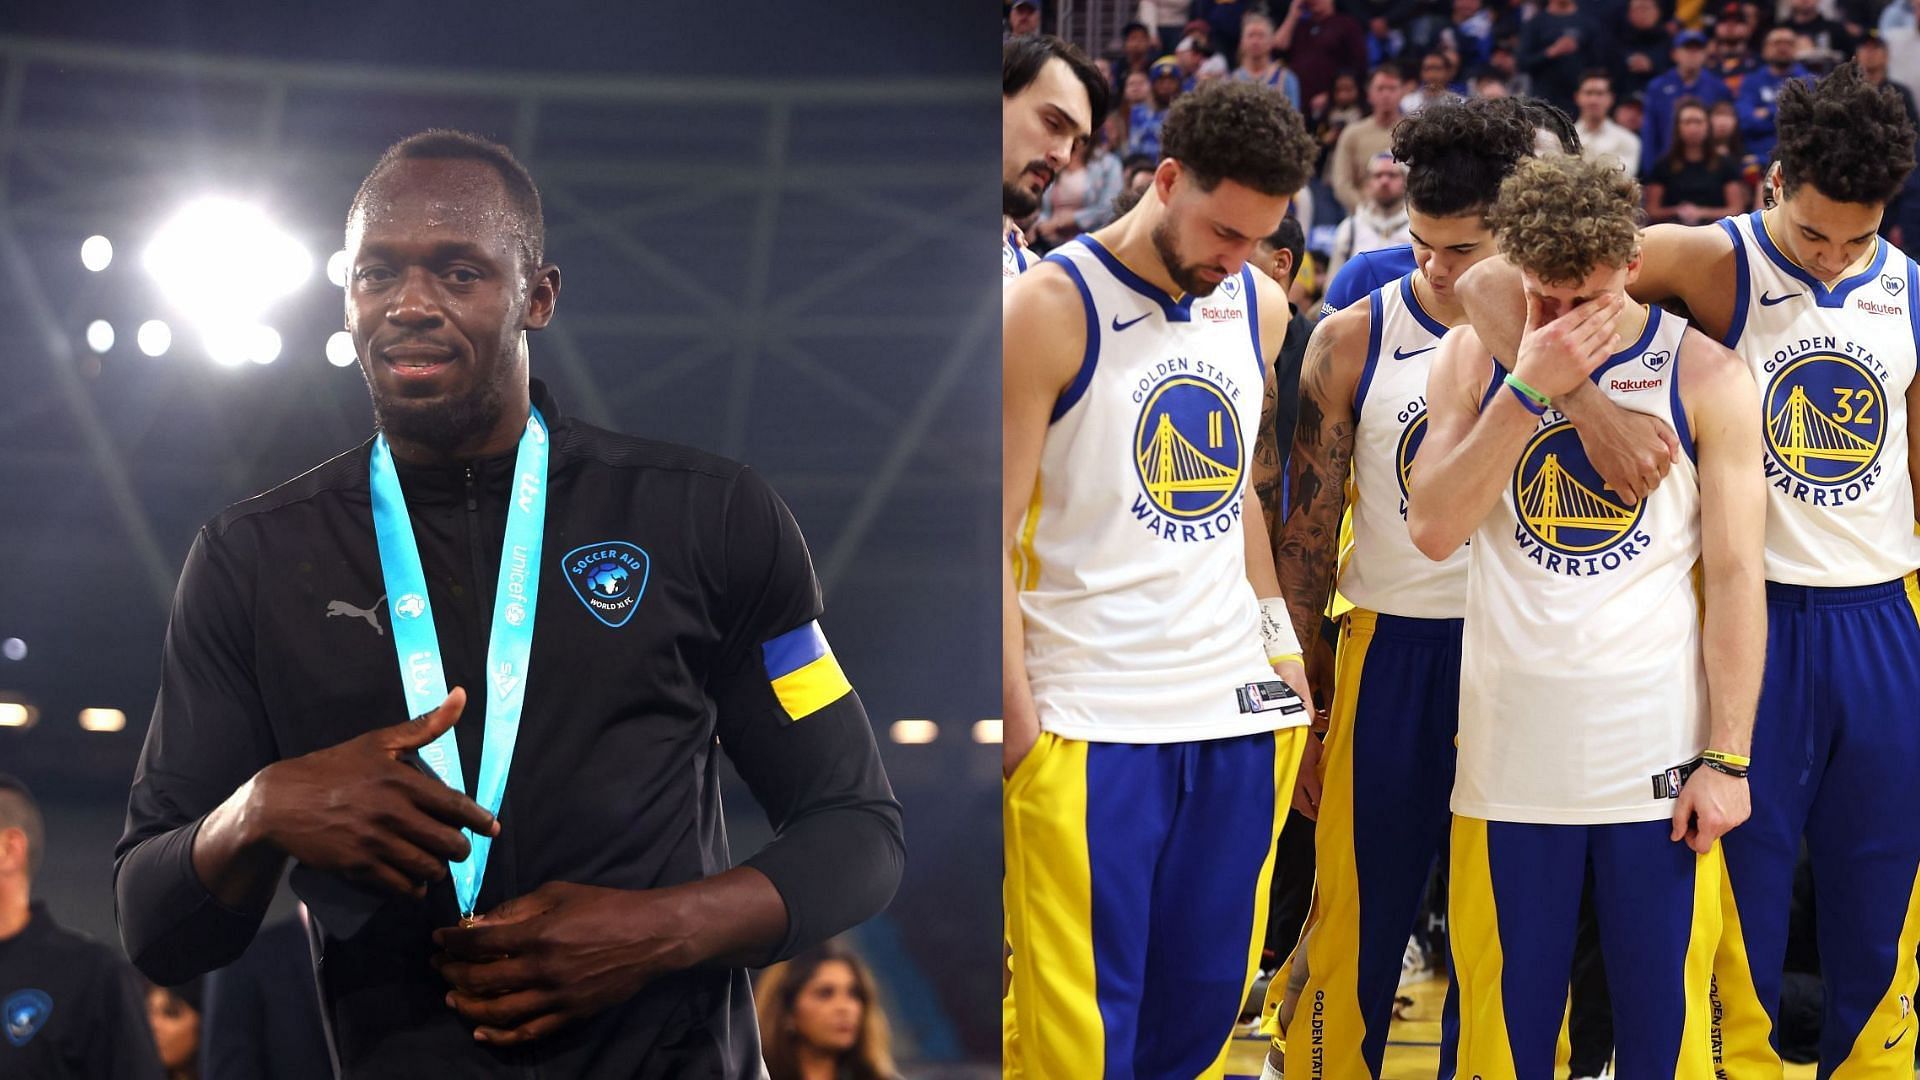 Usain Bolt (L) and Golden State Warriors (R) (Image via Getty)